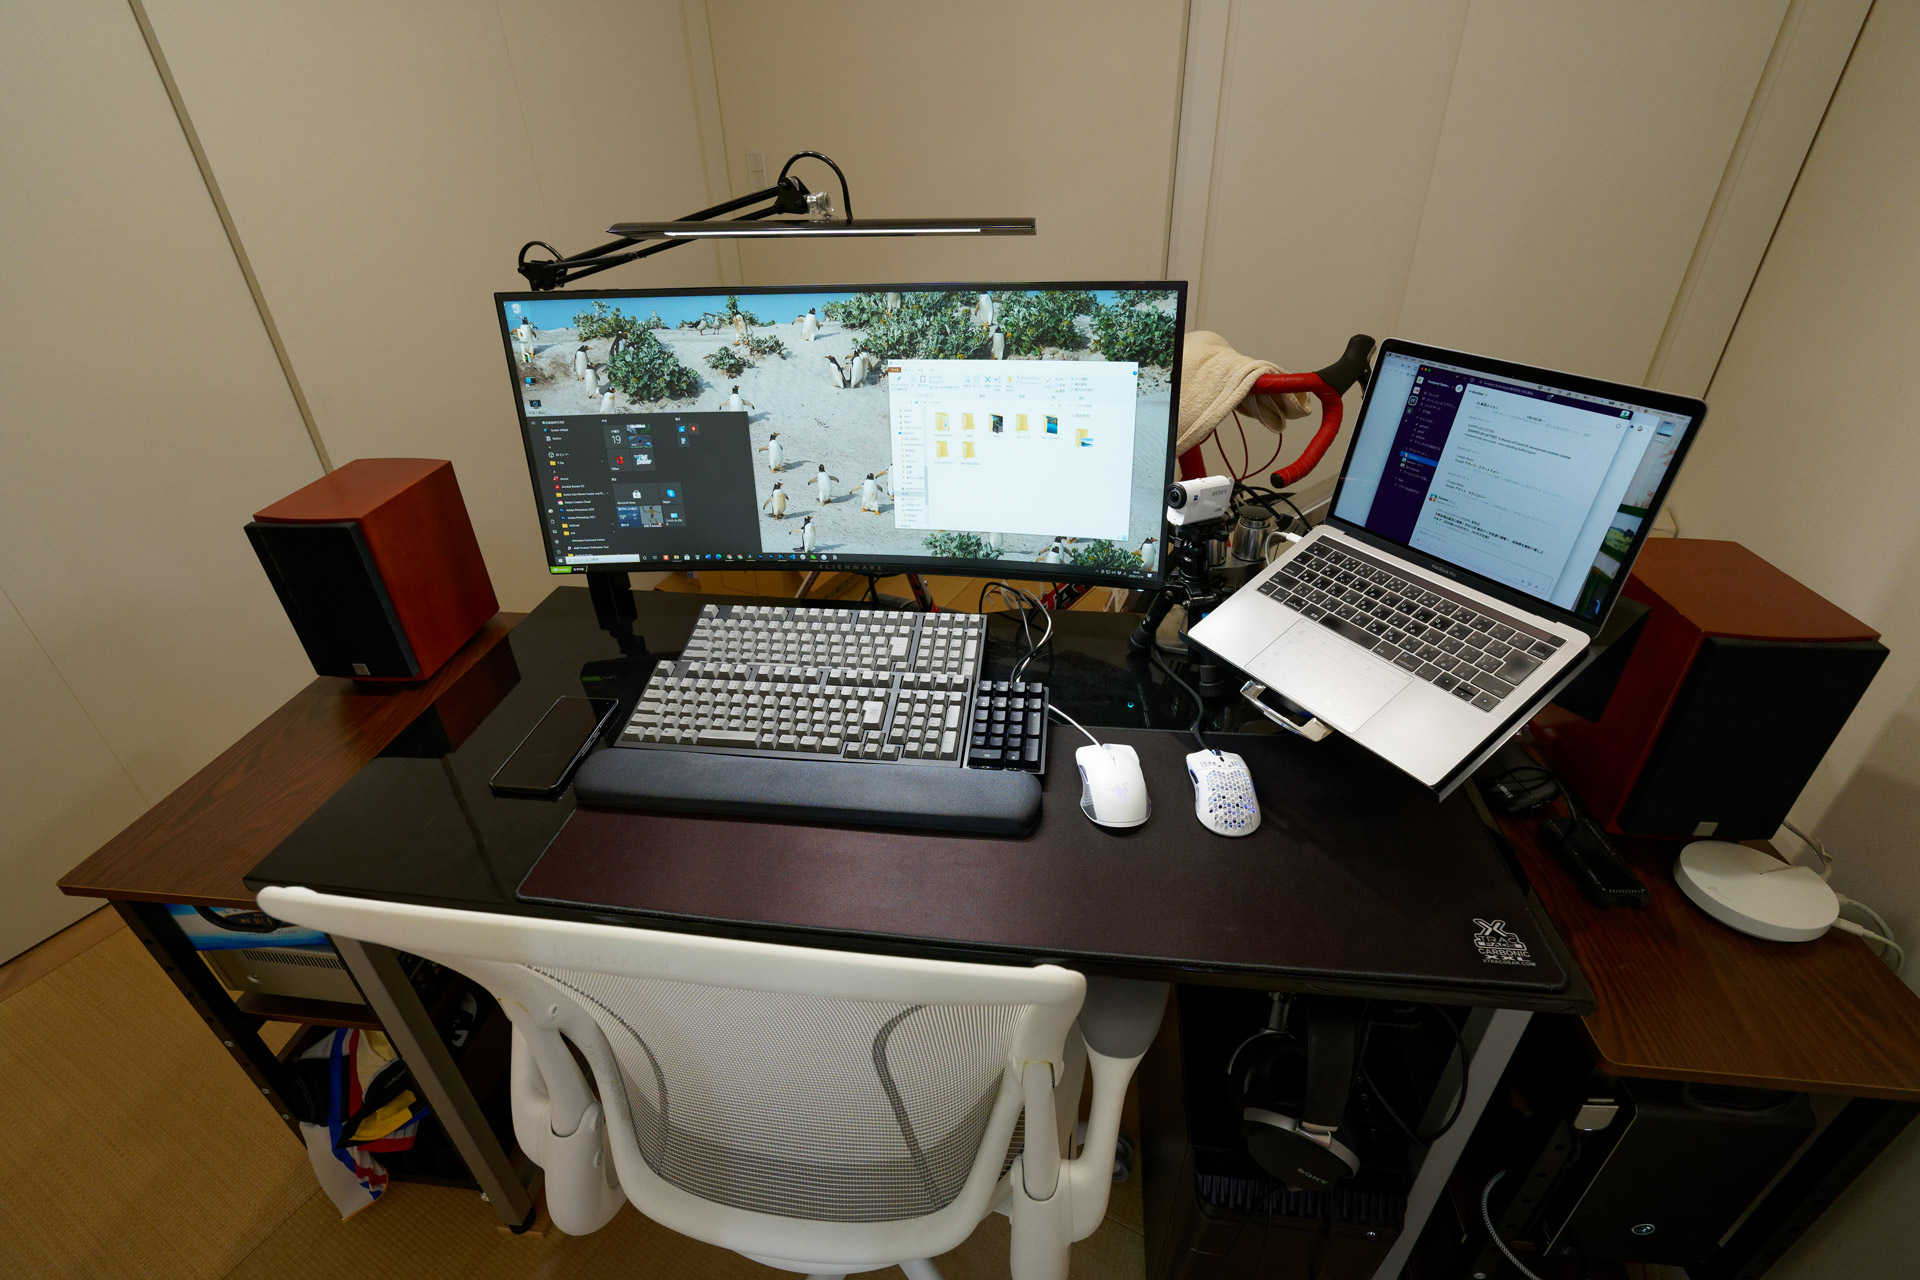 Two desktop PCs and one MacBook Pro connected to a single monitor.